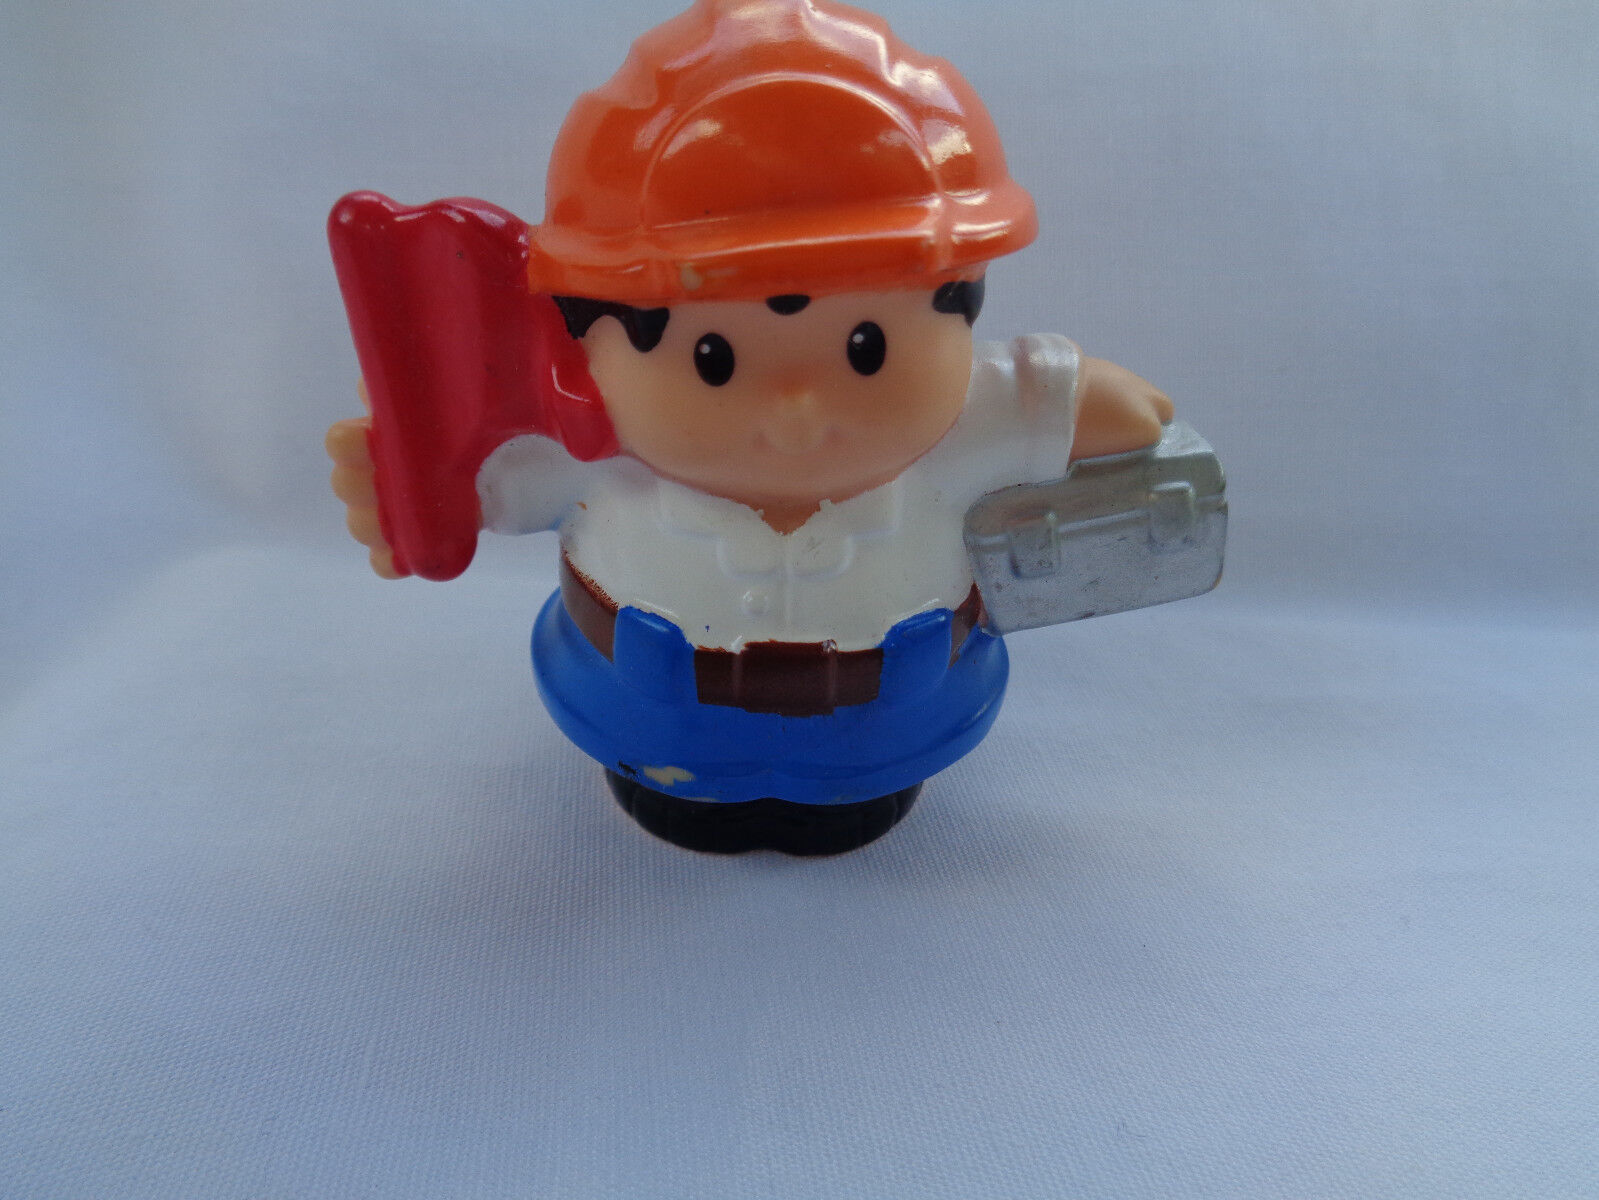 2010 Fisher Price Little People Construction Worker Hard Hat Flag - as is - $1.92